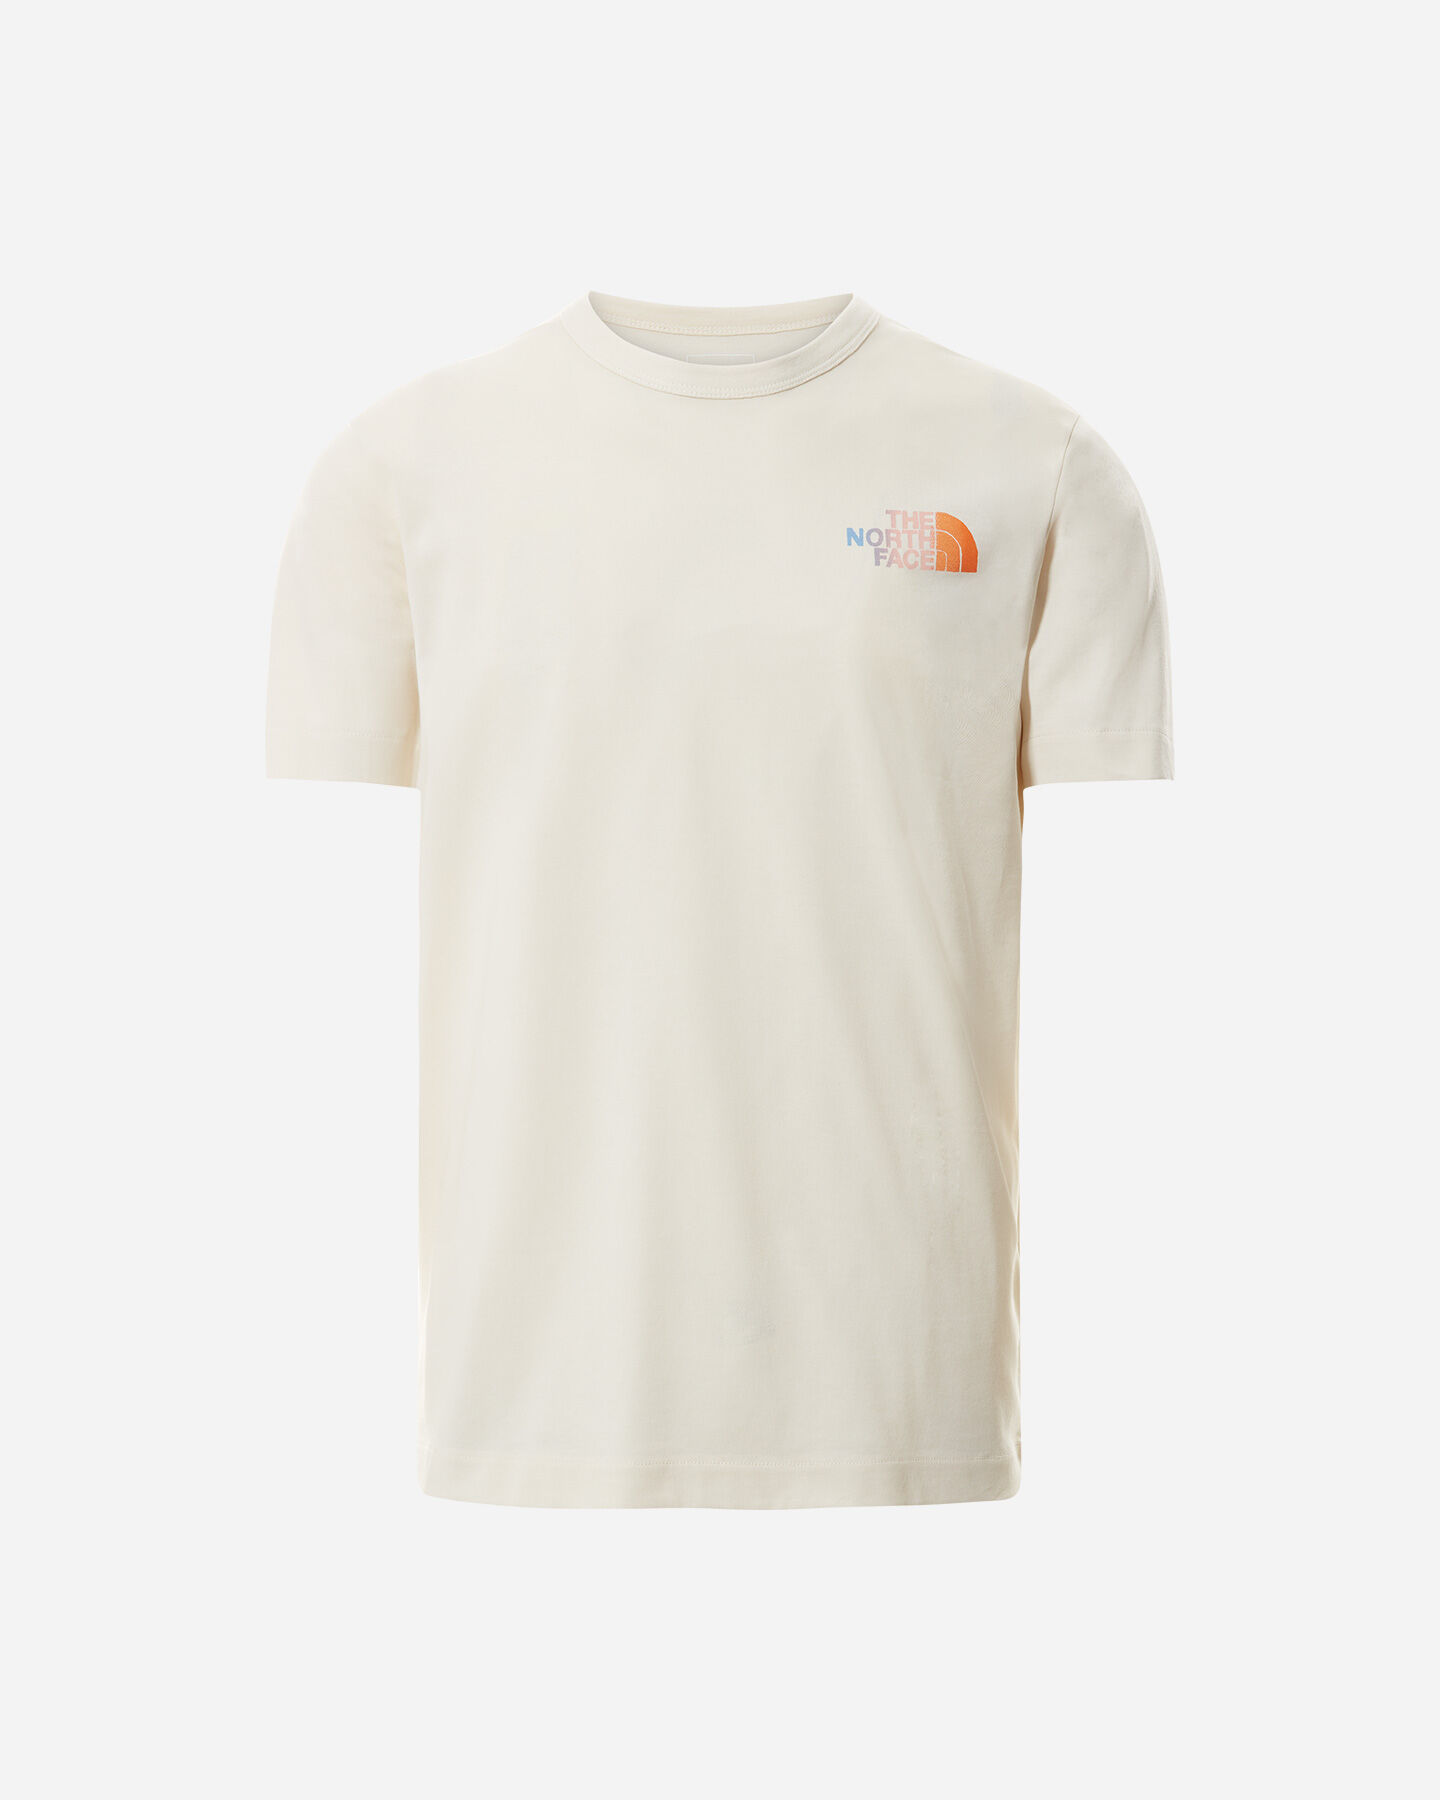  T-Shirt THE NORTH FACE HIMALAYAN BOTTLE M S5293096|11P|XS scatto 0